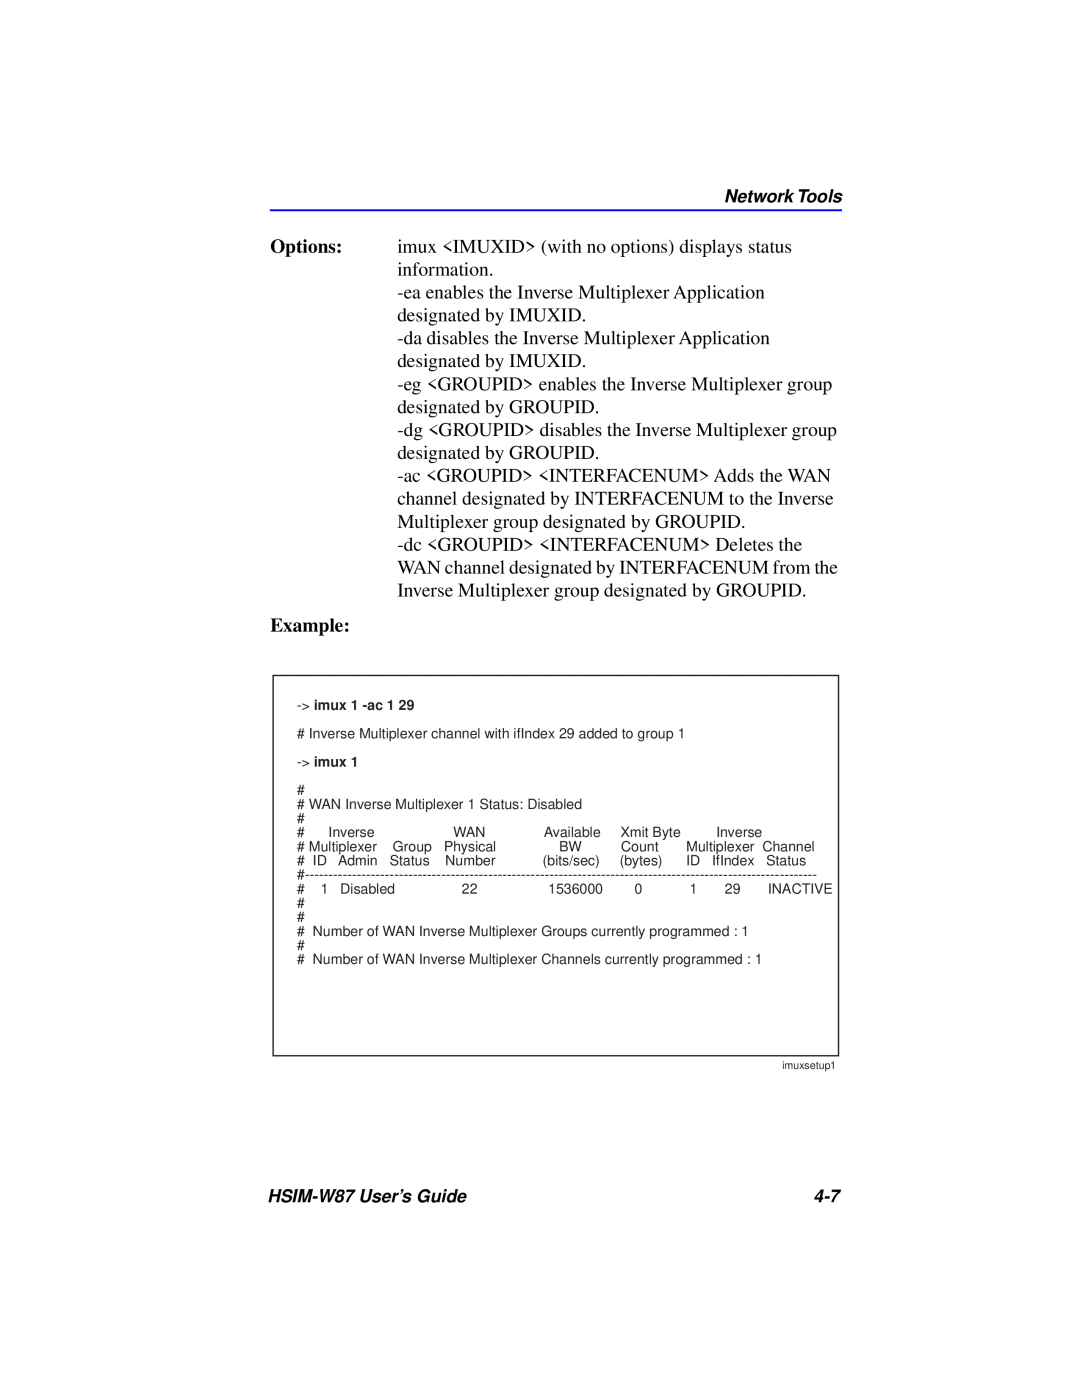 Cabletron Systems HSIM-W87 manual Example 